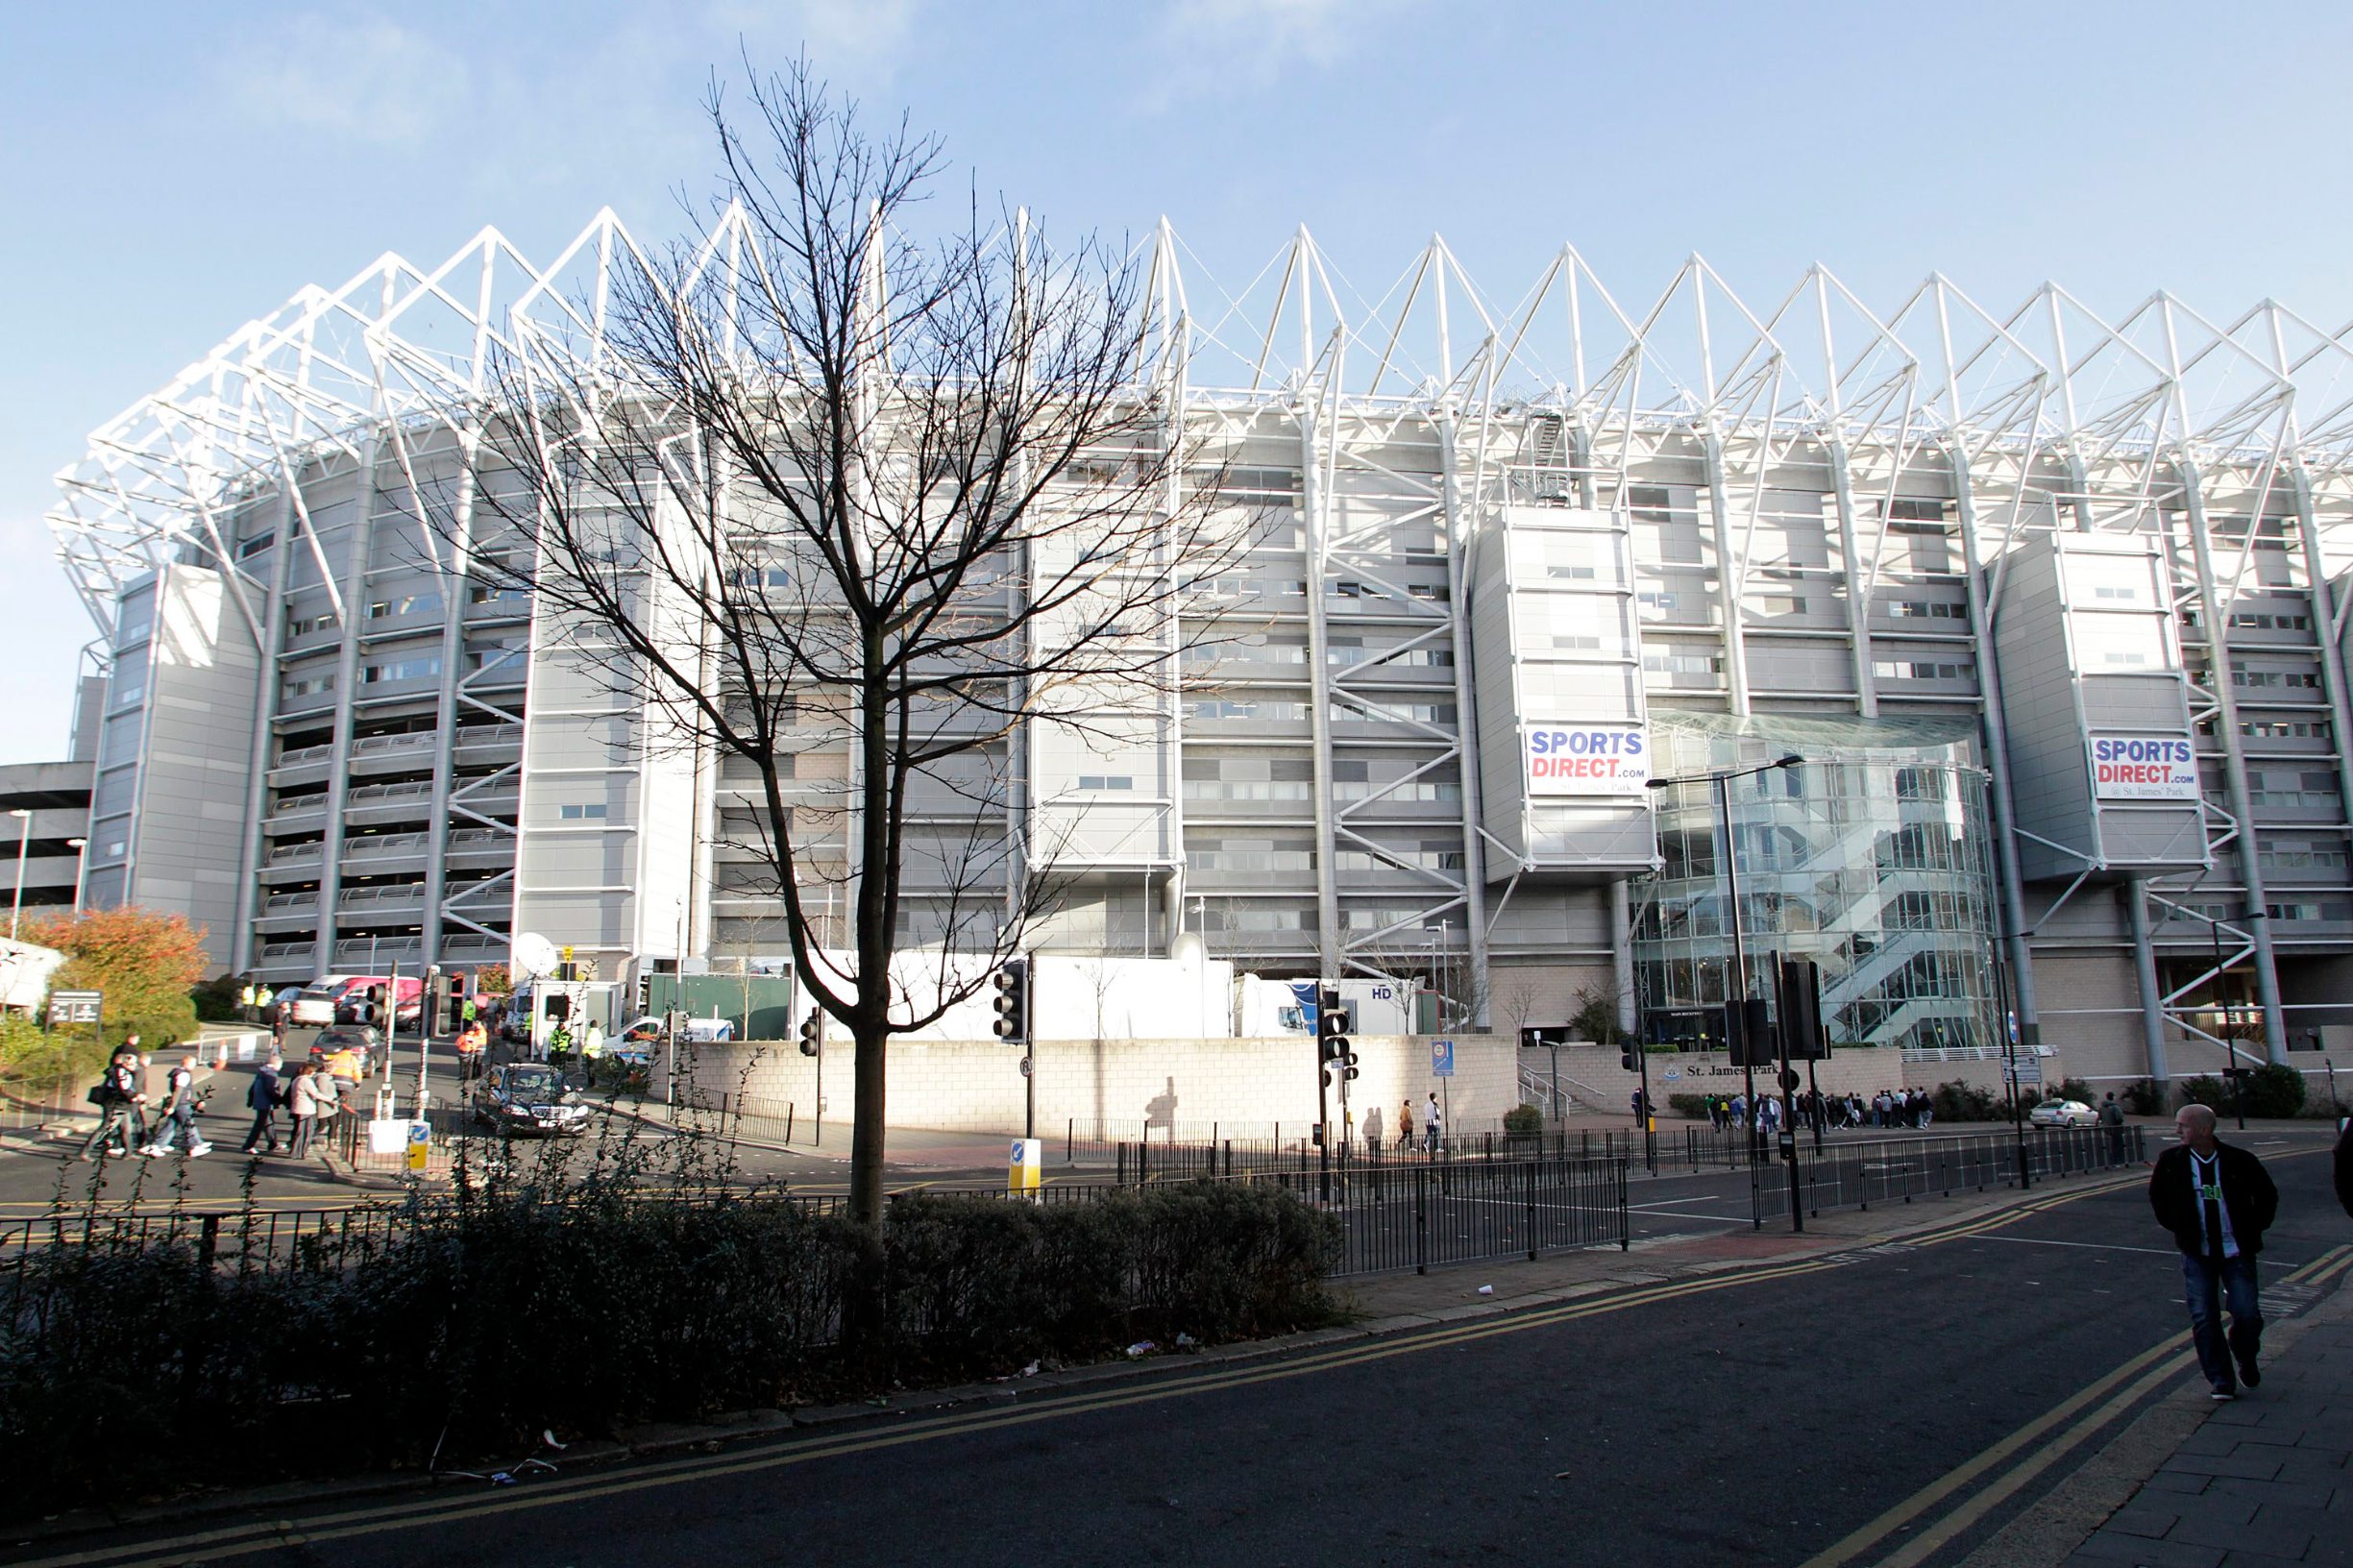 (FILES) In this file photo taken on December 03, 2011 A general view shows the outside of St James' Park, the home of English Premier League football team Newcastle United, in Newcastle-upon-Tyne - A Saudi-backed £300m (8 million) takeover of Newcastle United is nearing completion at a time when the rest of the football industry is on its knees due to the economic crisis caused by coronavirus. For Saudi Arabia's Public Investment Fund (PIF), led by Crown Prince Mohammed bin Salman, that will reportedly take an 80 percent stake in the Premier League club, the crisis presents an opportunity. (Photo by GRAHAM STUART / AFP)